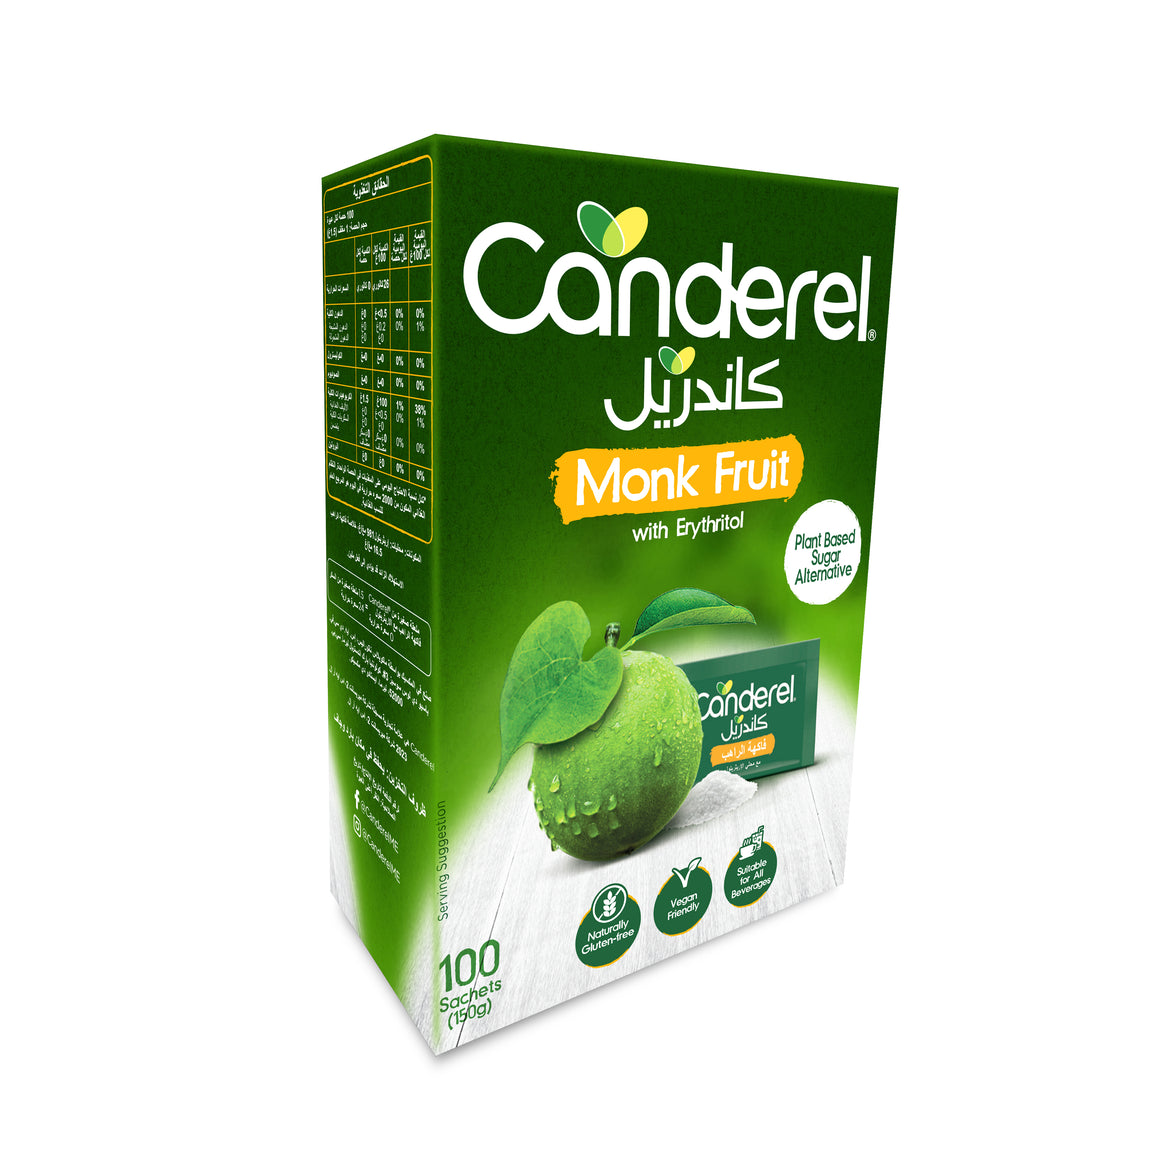 Canderel Monk Fruit With Erythritol - 100 Sachets (150gm)